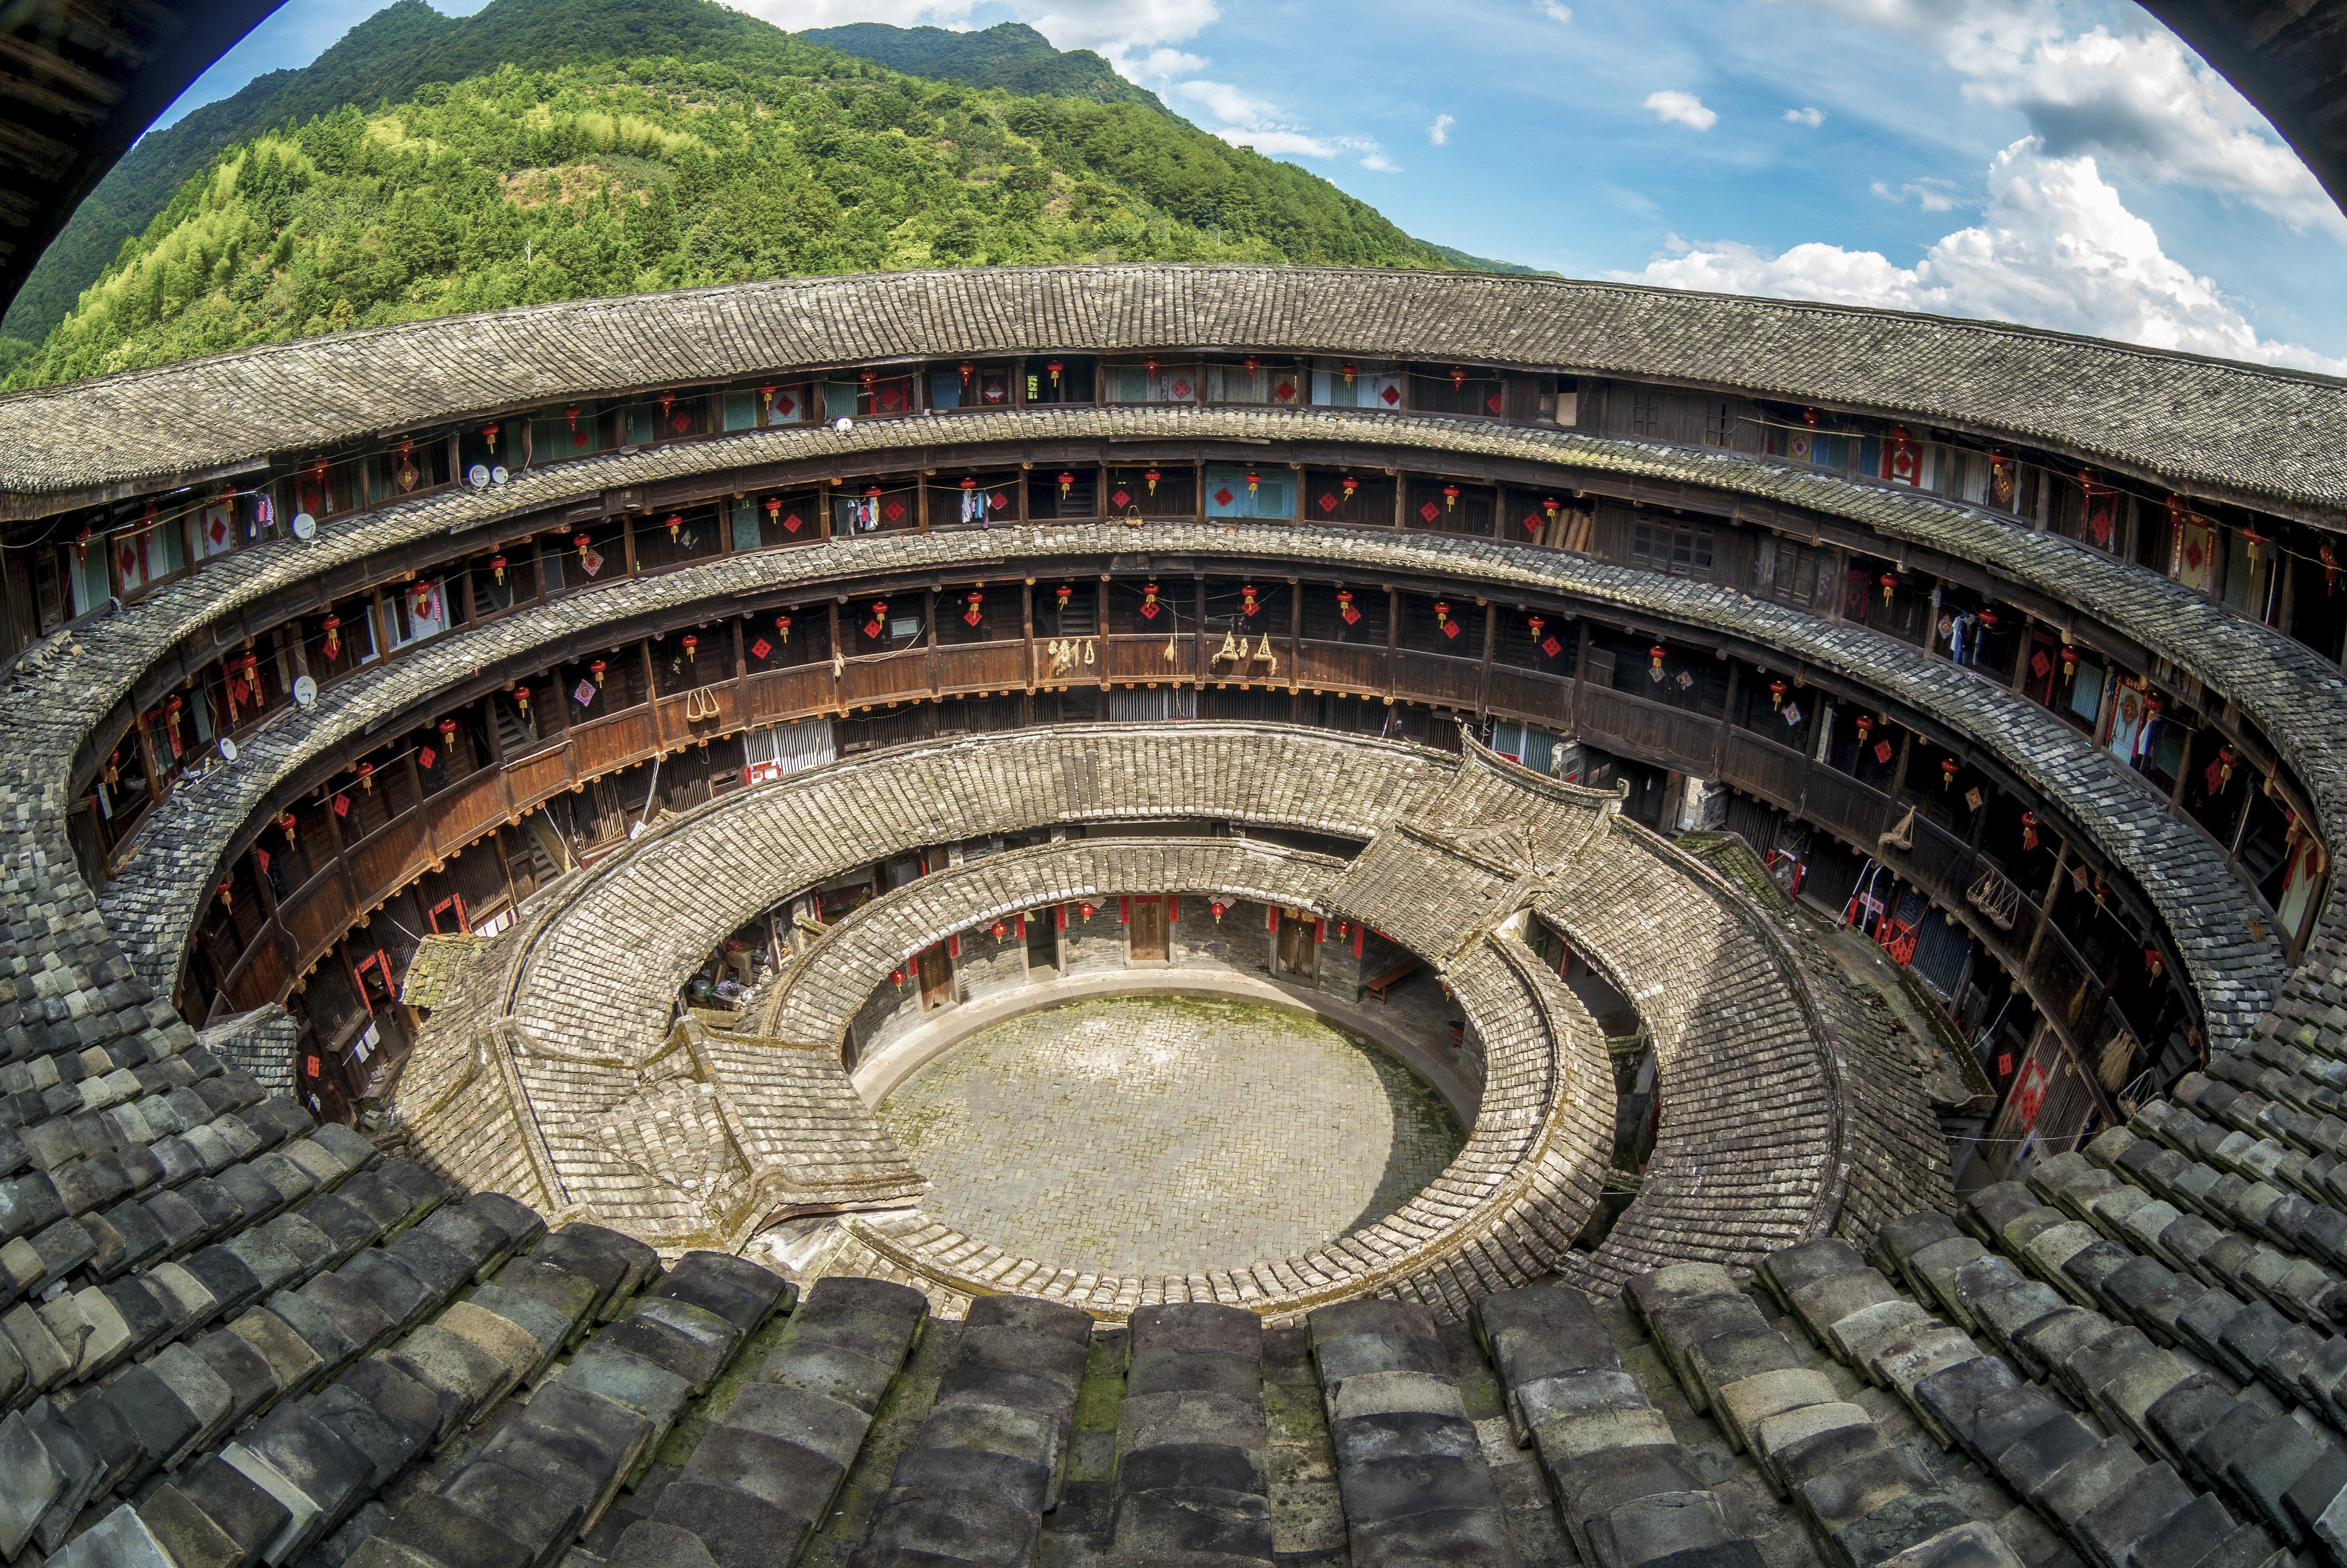 Forty-six doughnut-shaped roundhouses in Fujian have been awarded Unesco World Heritage status, but roughly 3,000 others are in a state of decay. One returnee is now trying to revive his childhood home and community